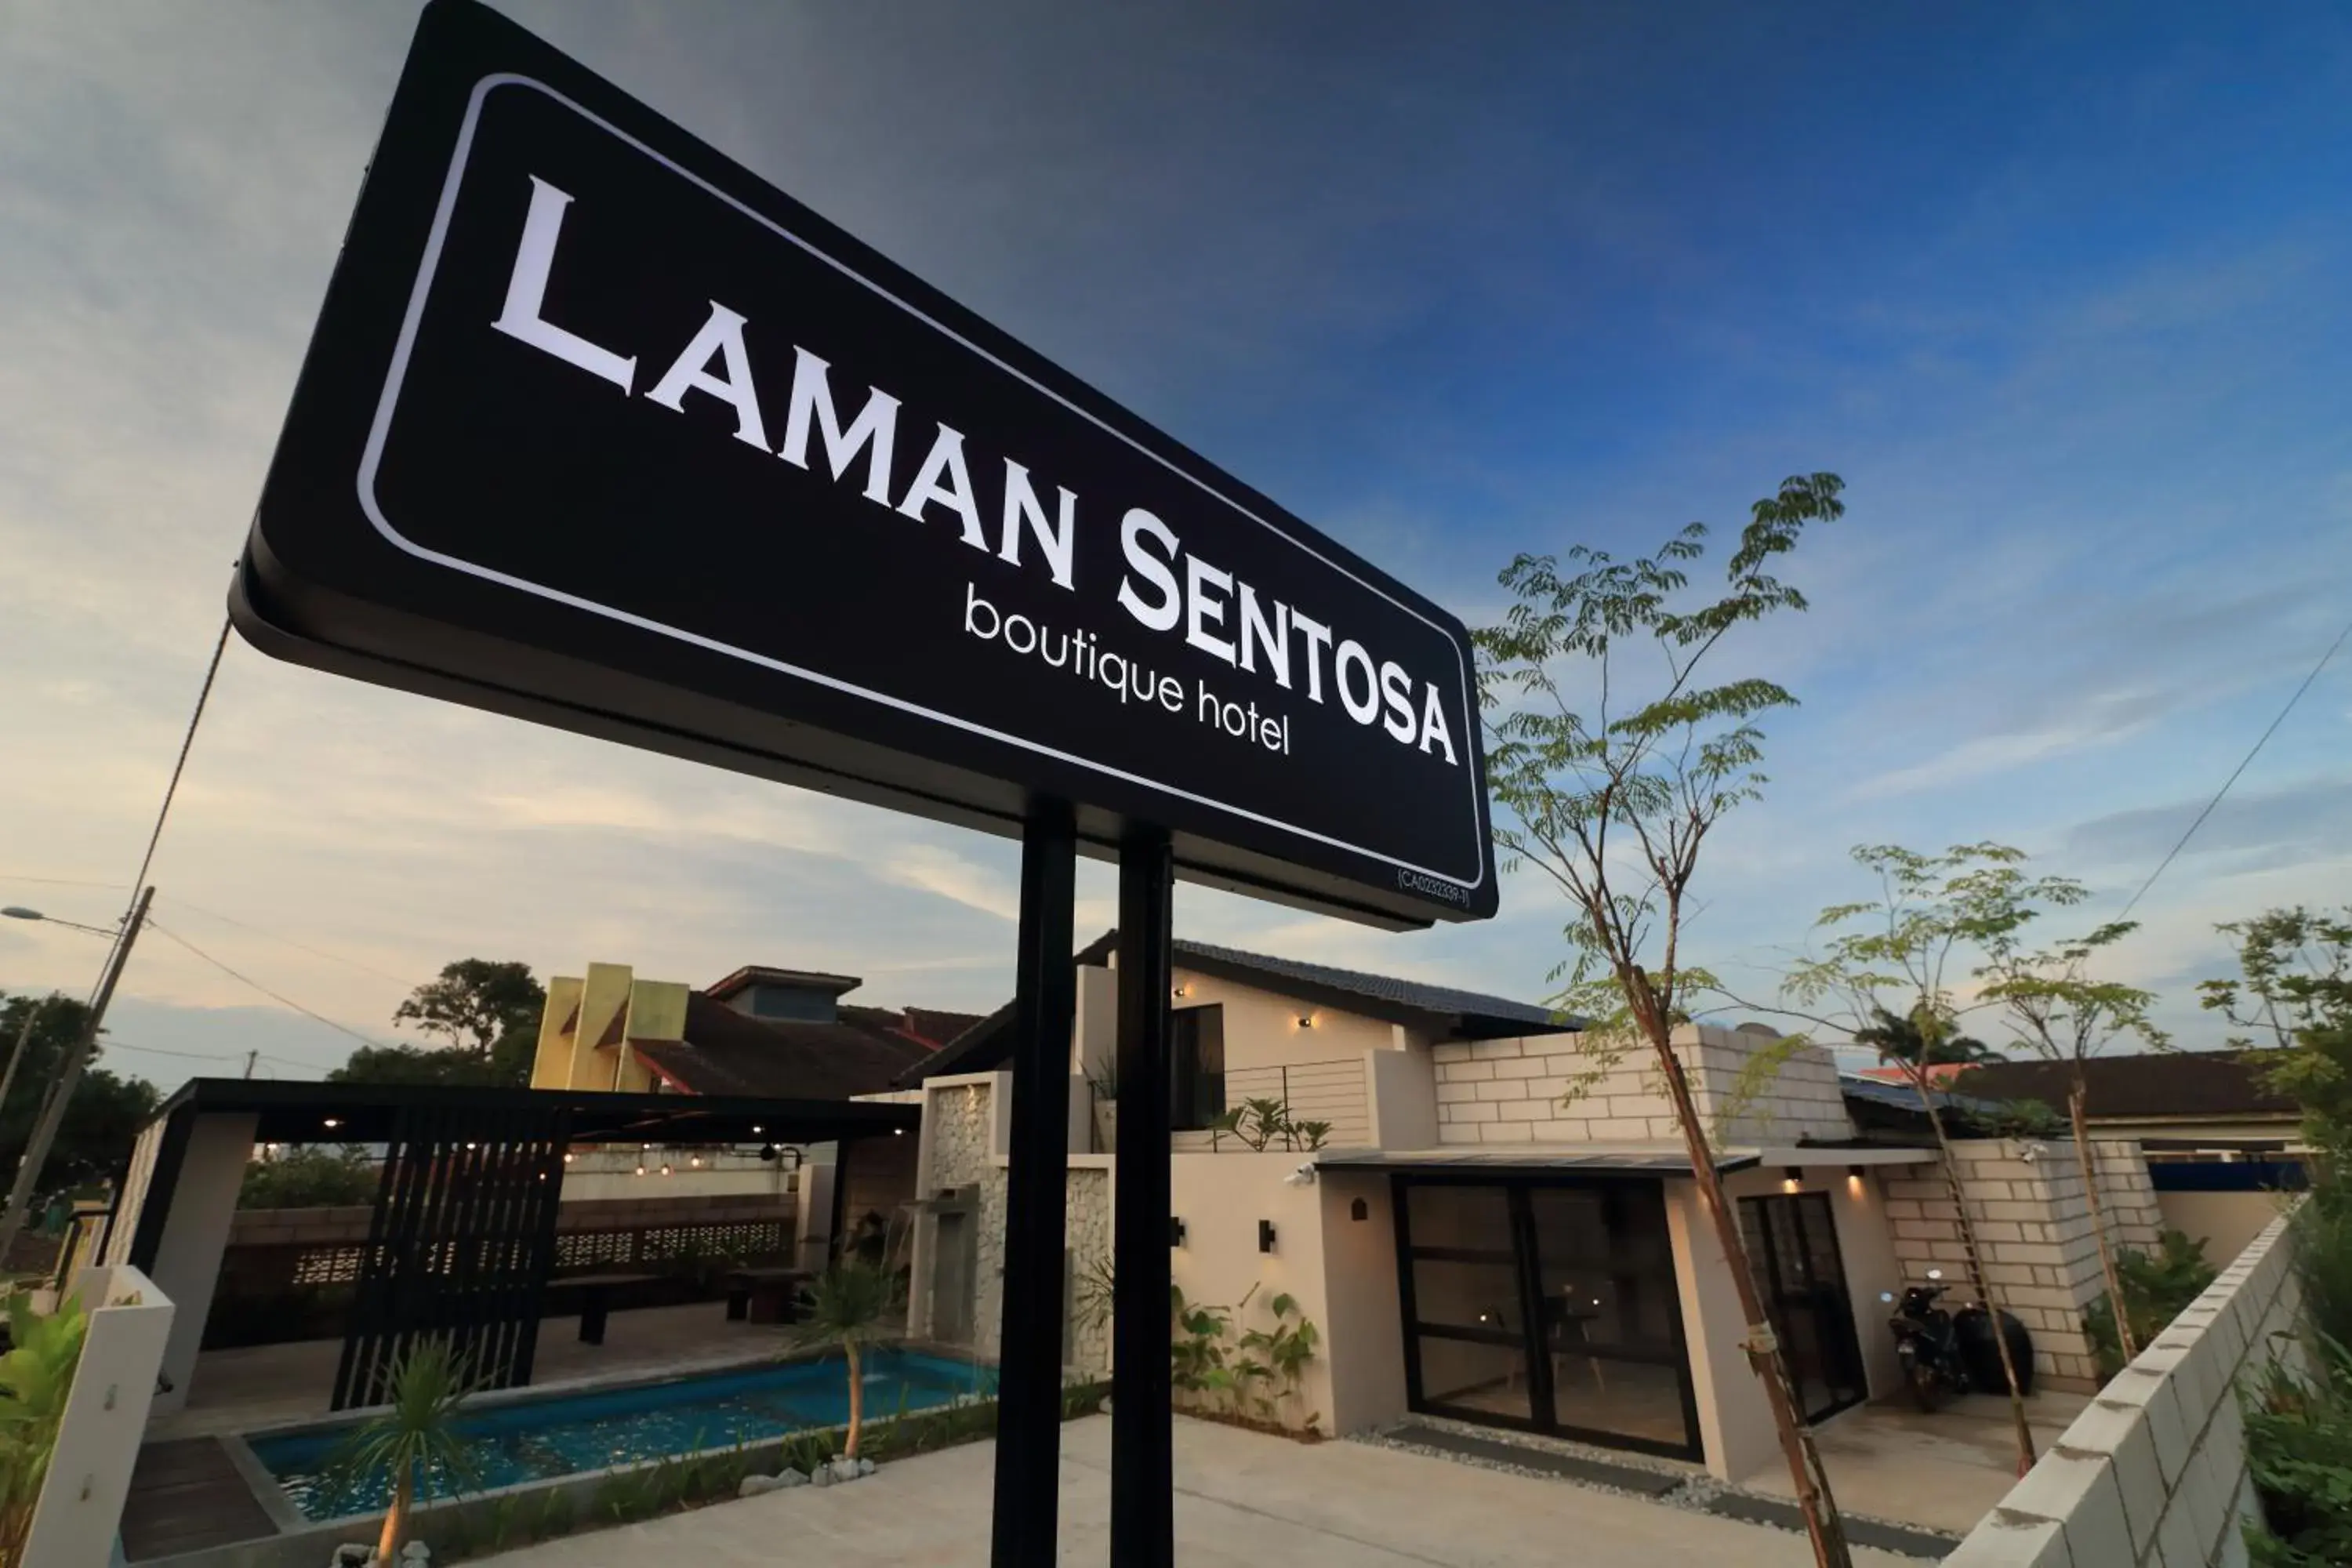 Property Building in Laman Sentosa Boutique Residence